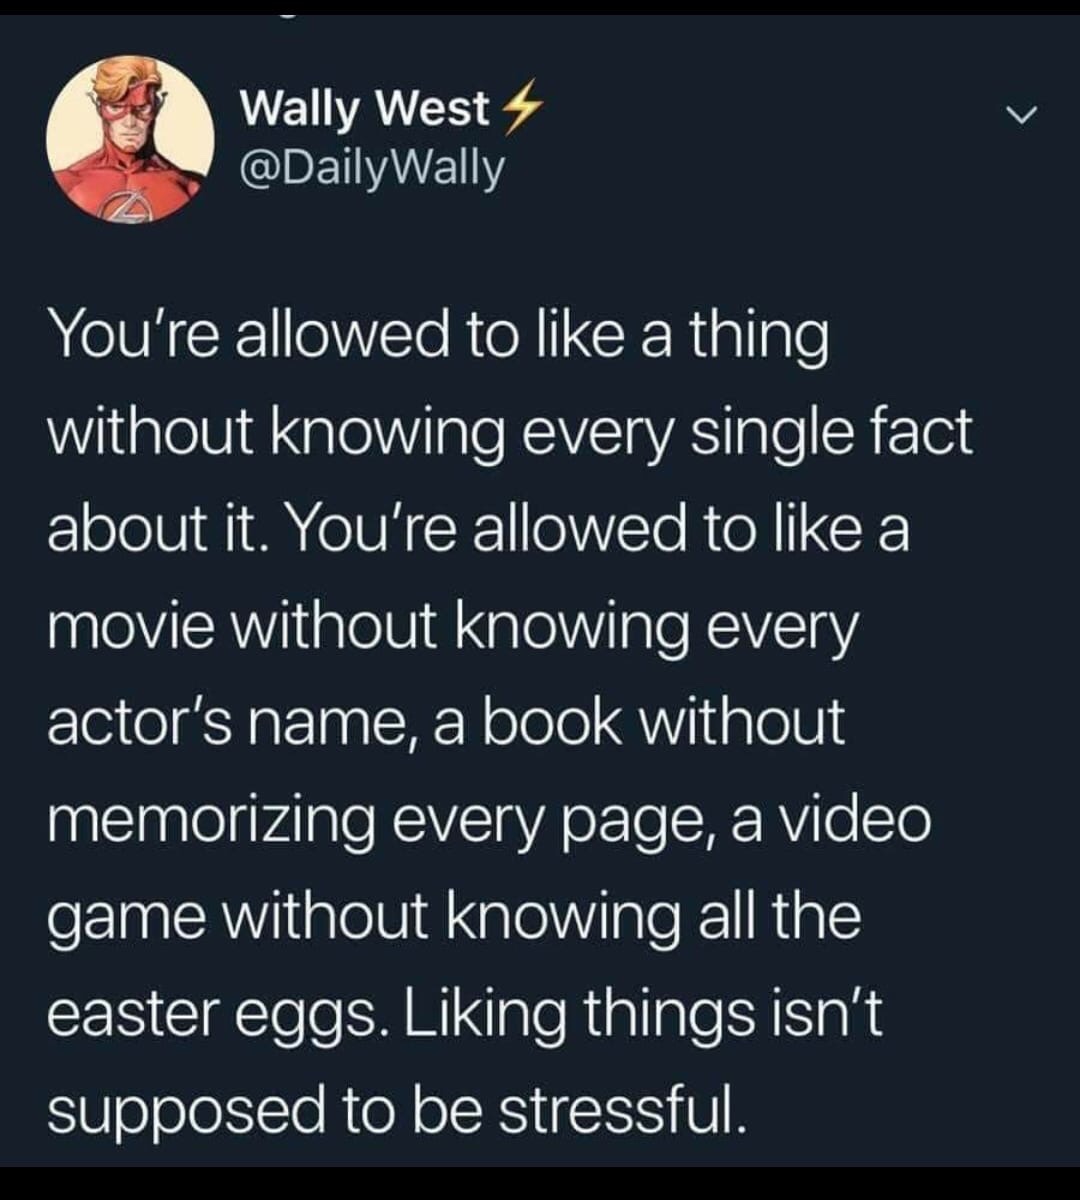 atmosphere - Wally West You're allowed to a thing without knowing every single fact about it. You're allowed to a movie without knowing every actor's name, a book without memorizing every page, a video game without knowing all the easter eggs. Liking thin